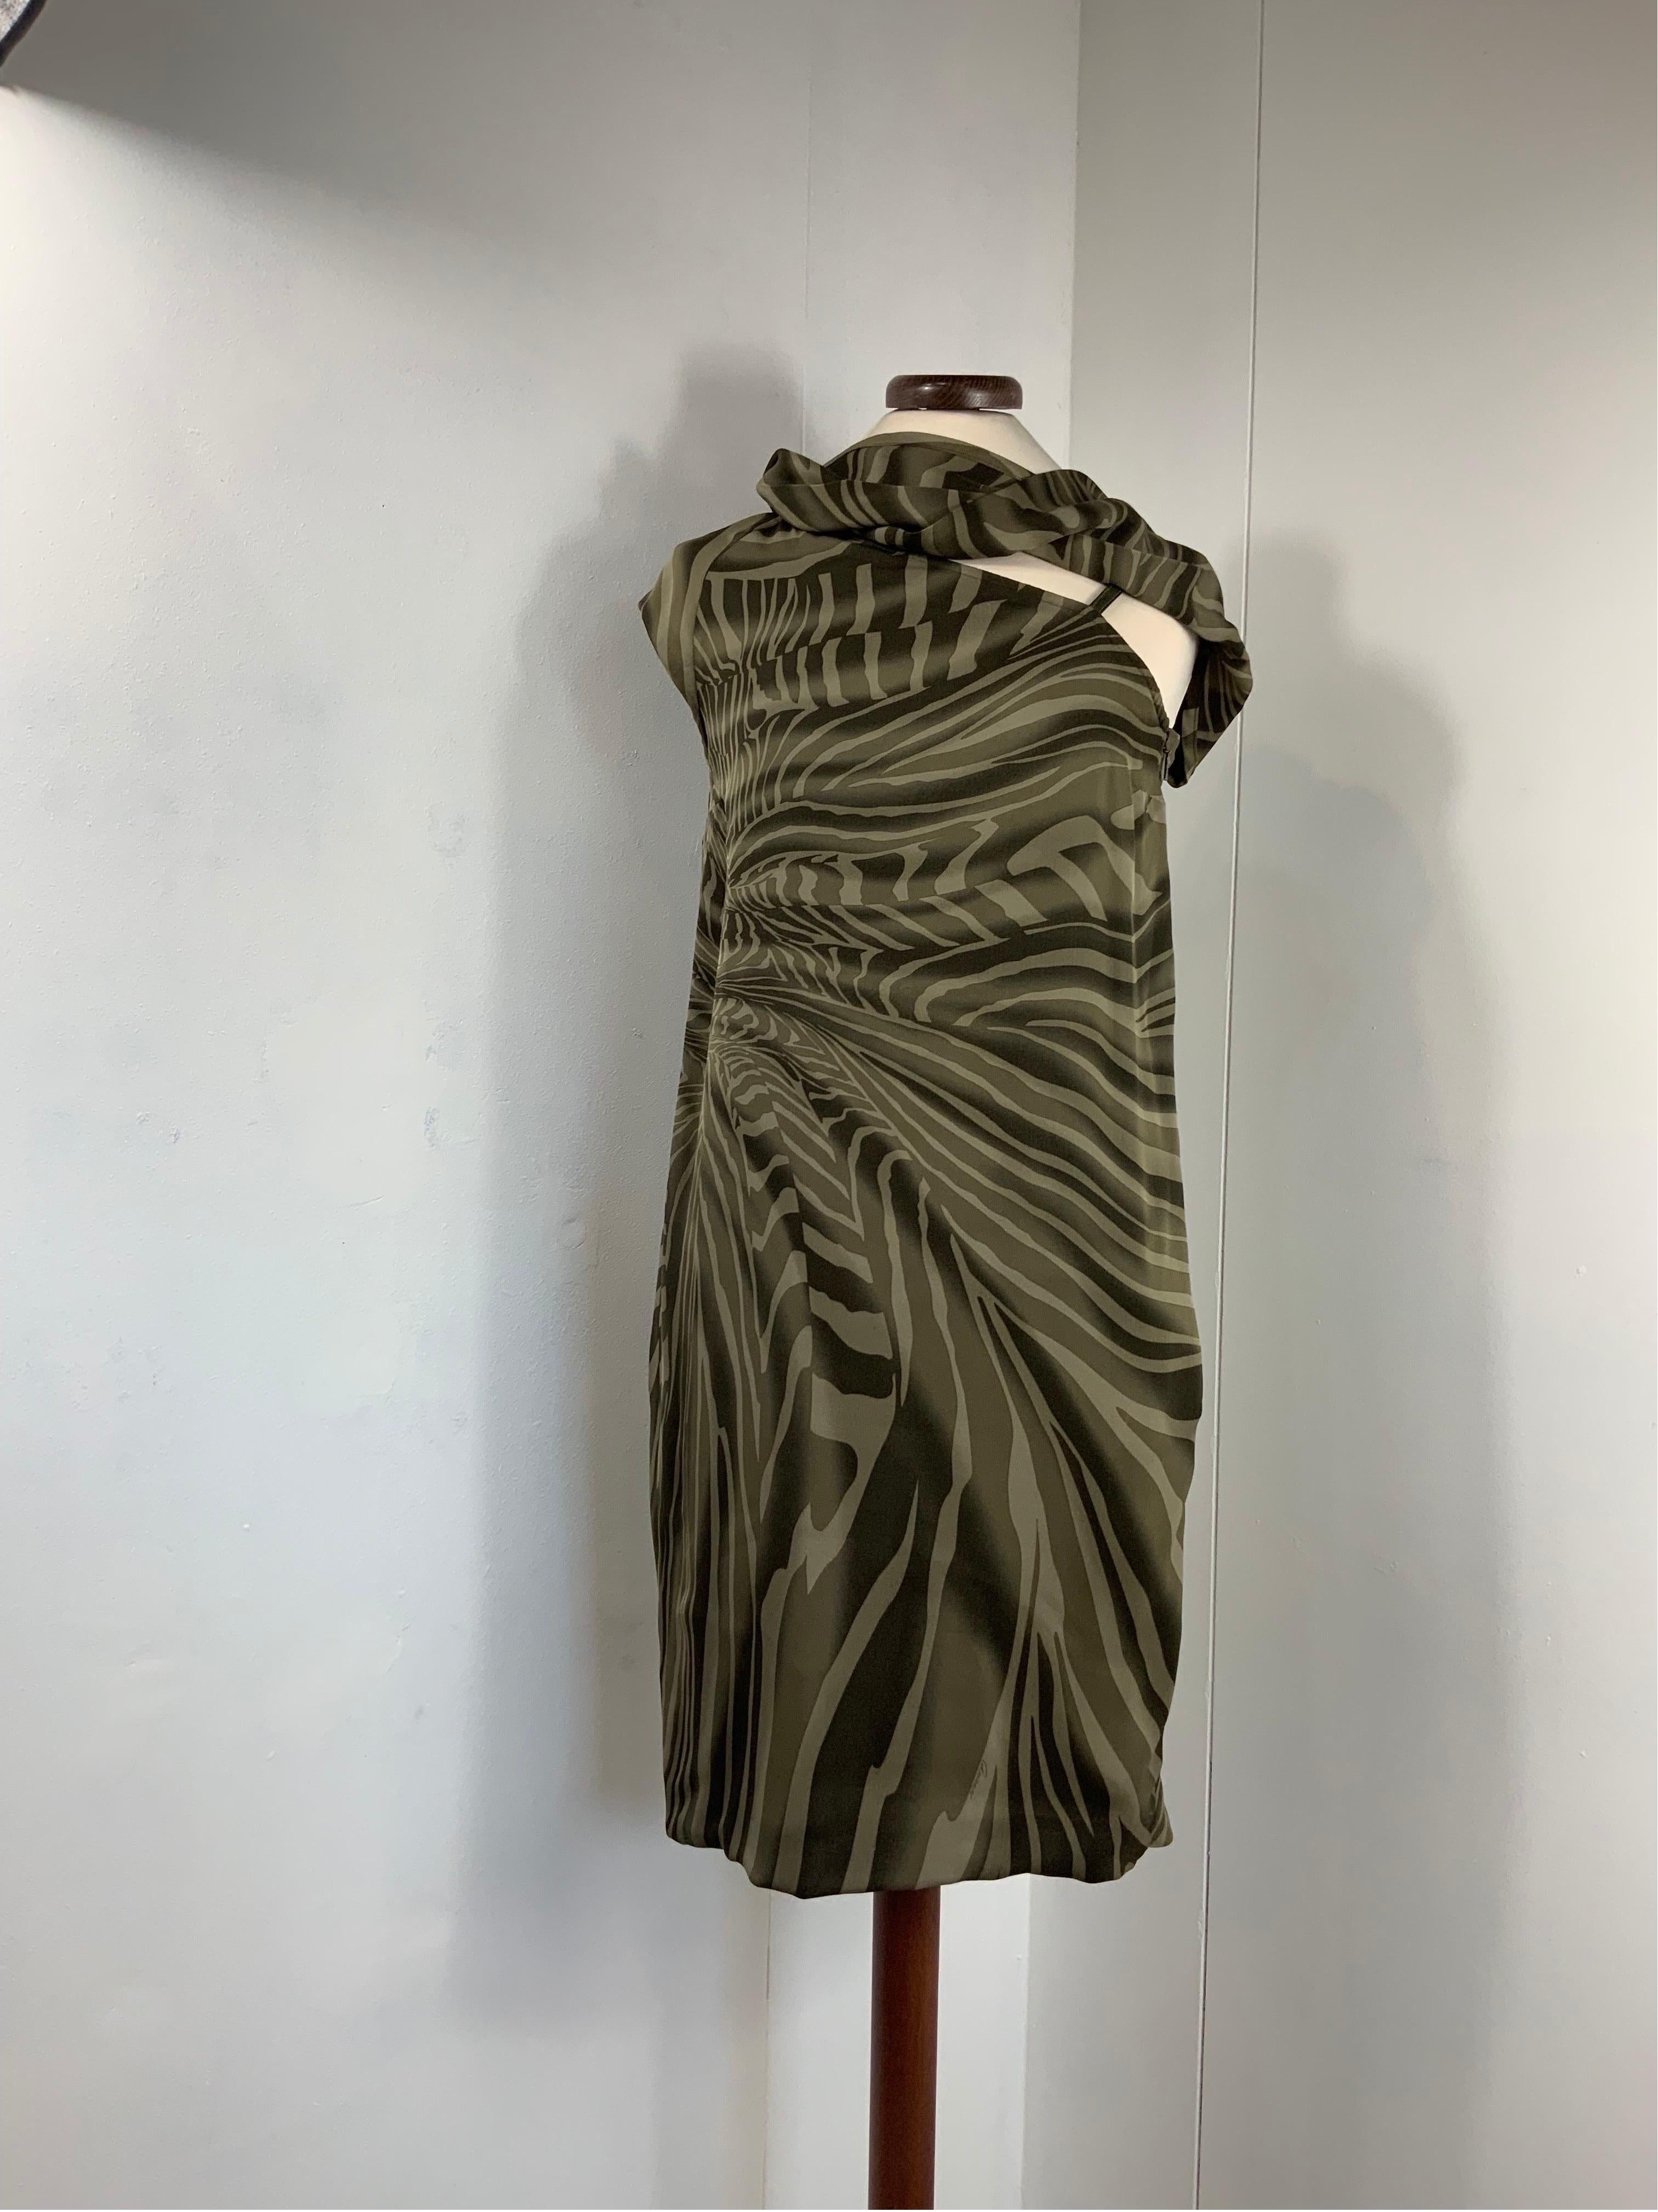 Gucci zebra dress. By Tom Ford.
Early 2000 style.
Featuring olive green and khaki zebra print silk chiffon and leather asymmetrical off the shoulder dress. Lateral zip and hook and eye closure.
Size 38 Italian.
Shoulder 38 cm
Bust 38 cm
Length 88